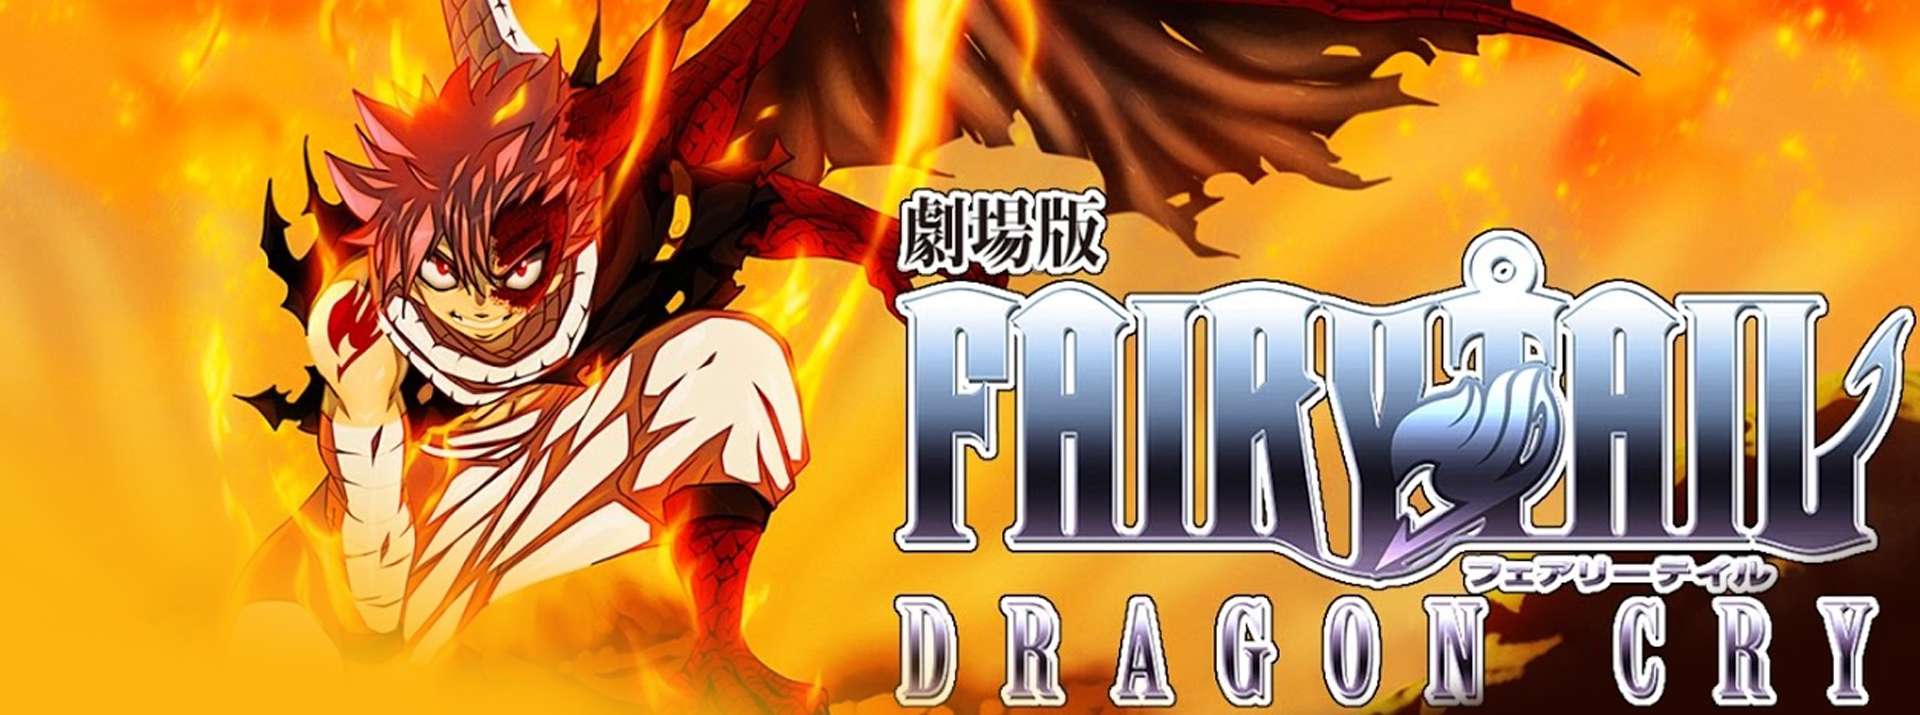 Fairy Tail: The Movie - Dragon Cry 